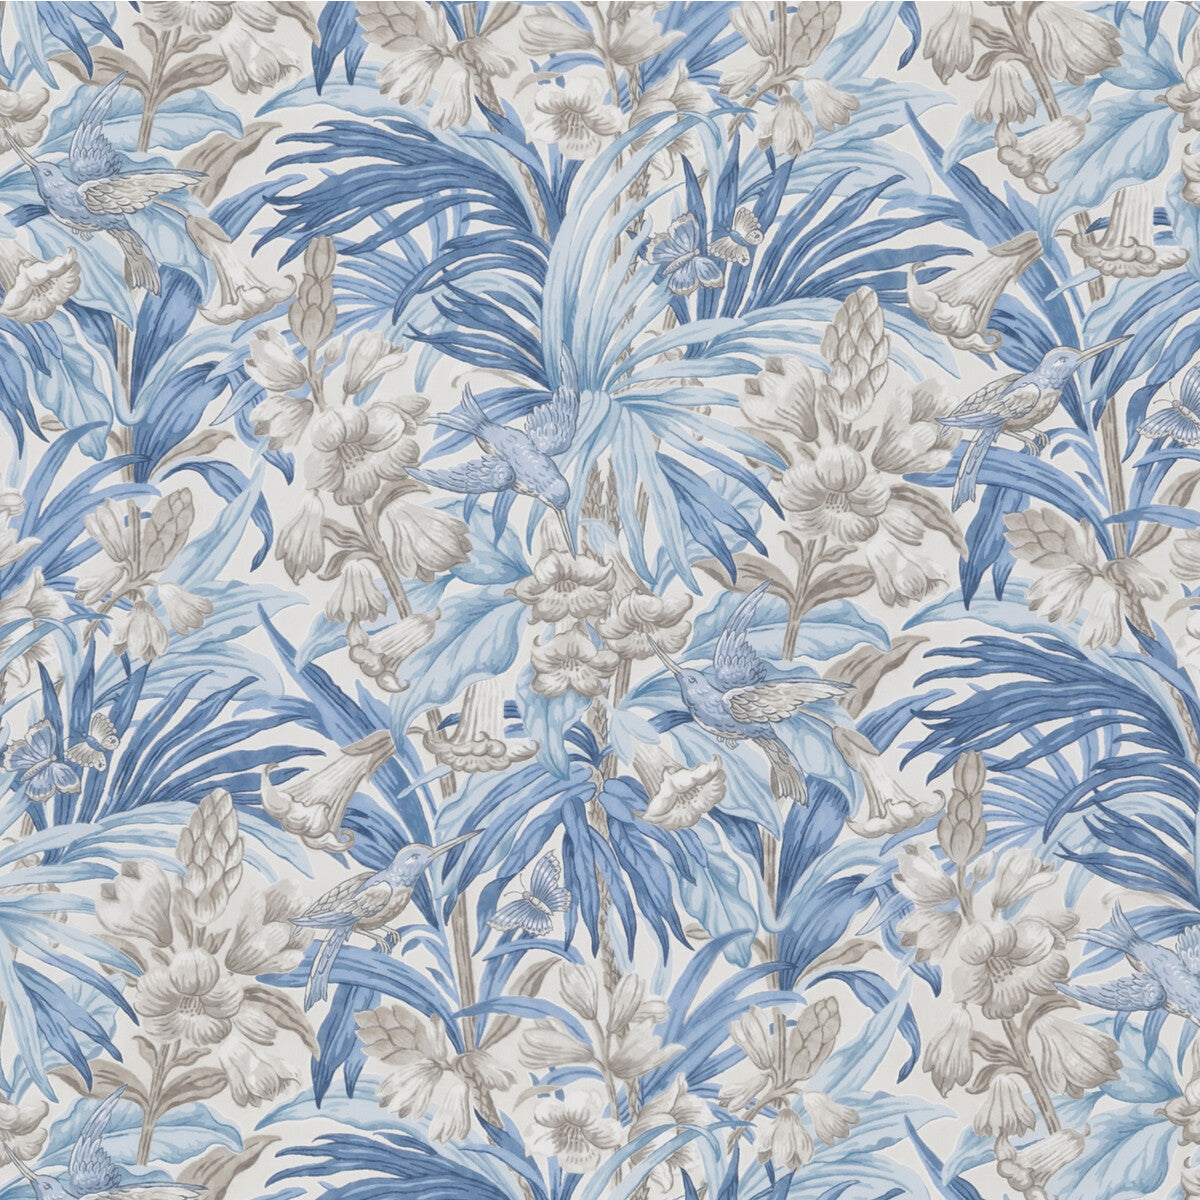 Trumpet Flowers Cotton fabric in blue color - pattern BP10976.2.0 - by G P &amp; J Baker in the Original Brantwood Fabric collection